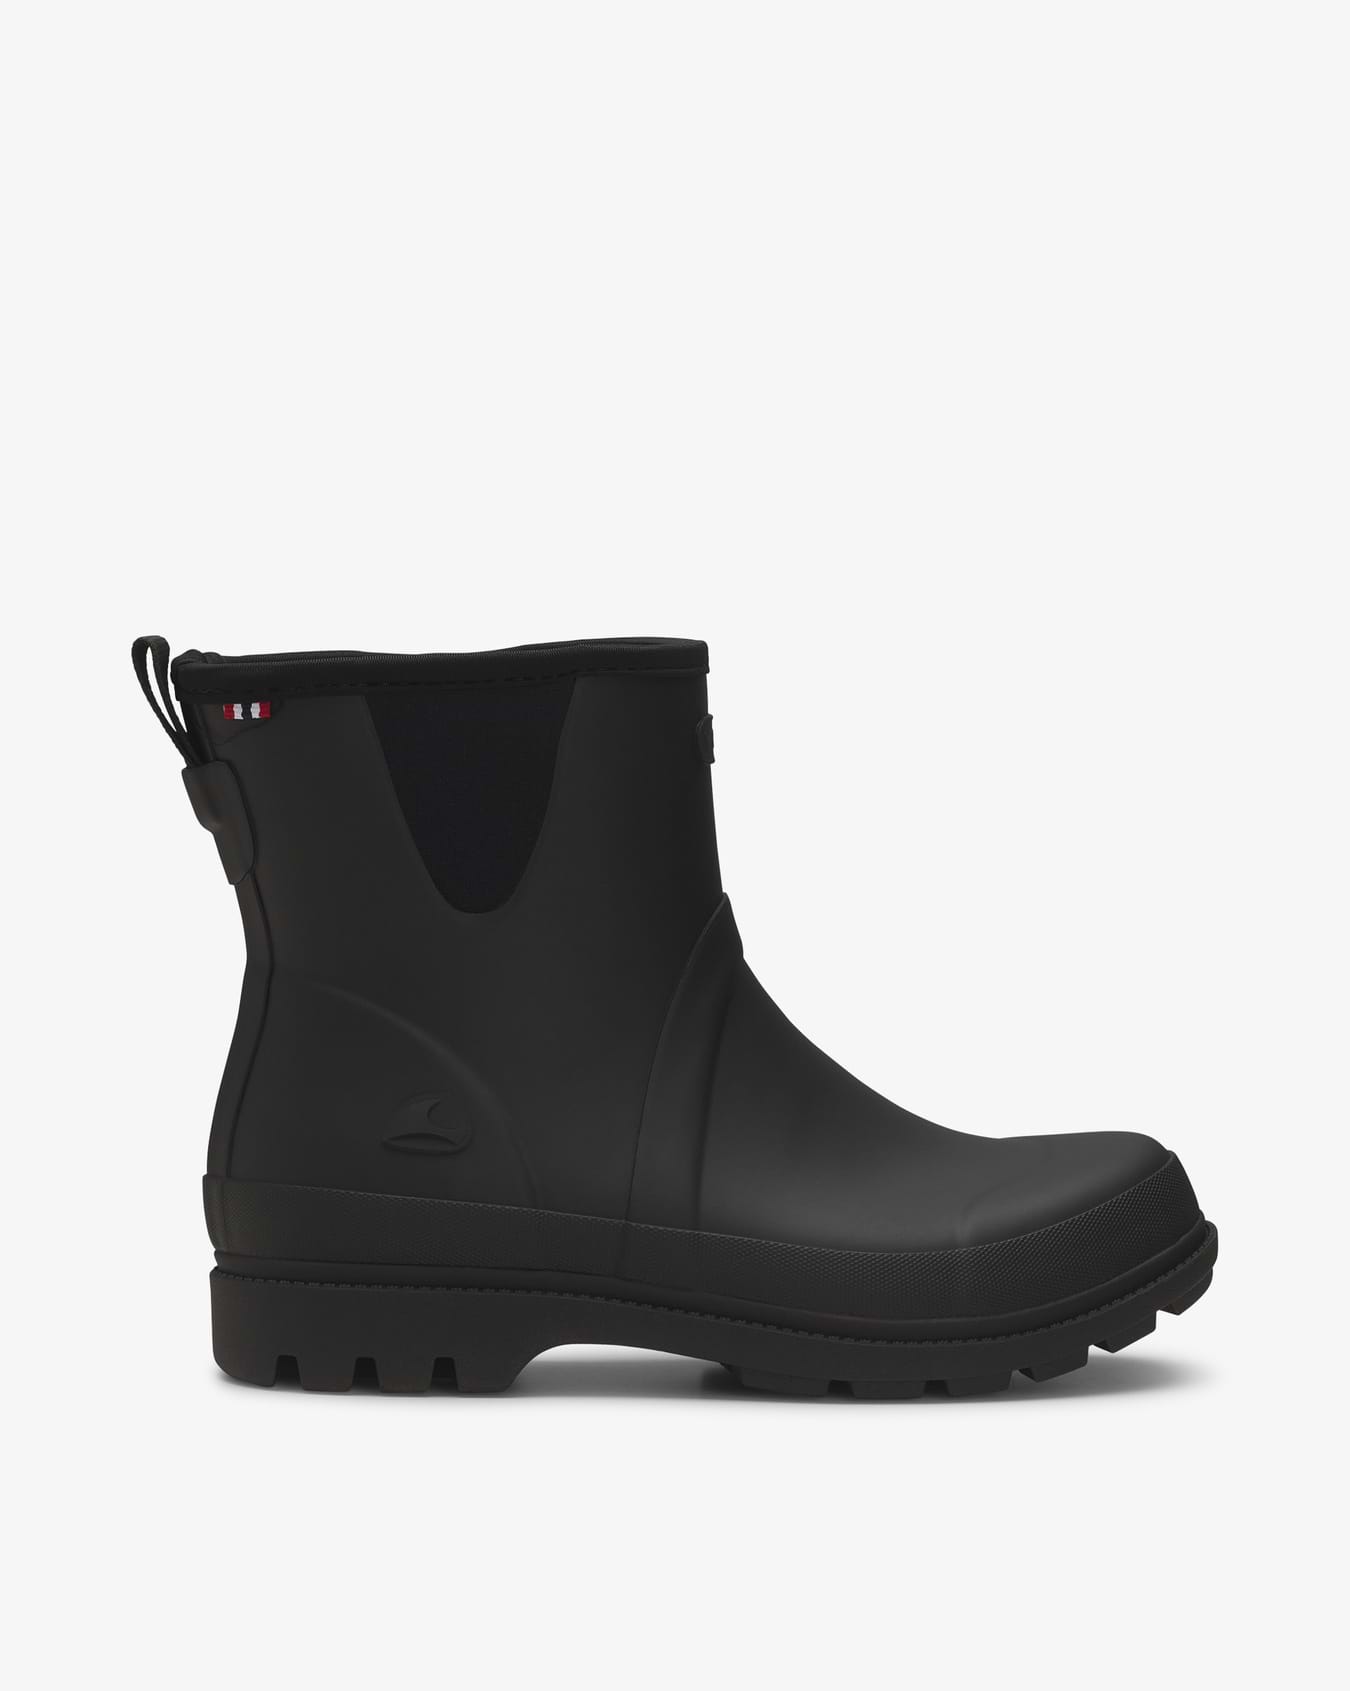 Noble Neo Black Rubber Boot